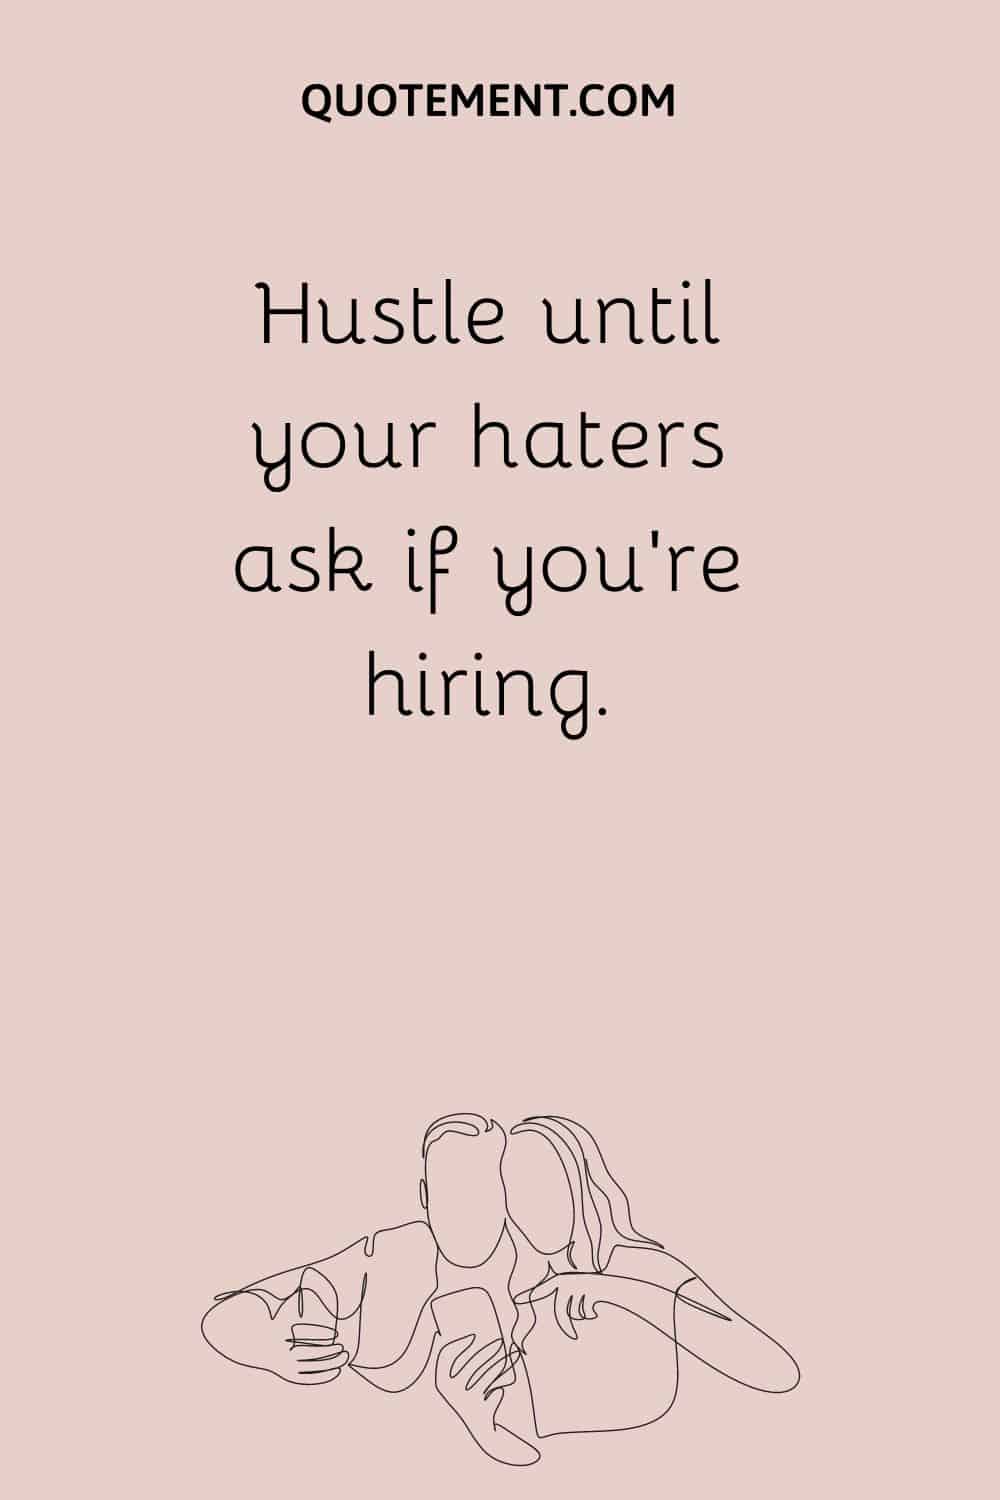 Hustle until your haters ask if you're hiring.